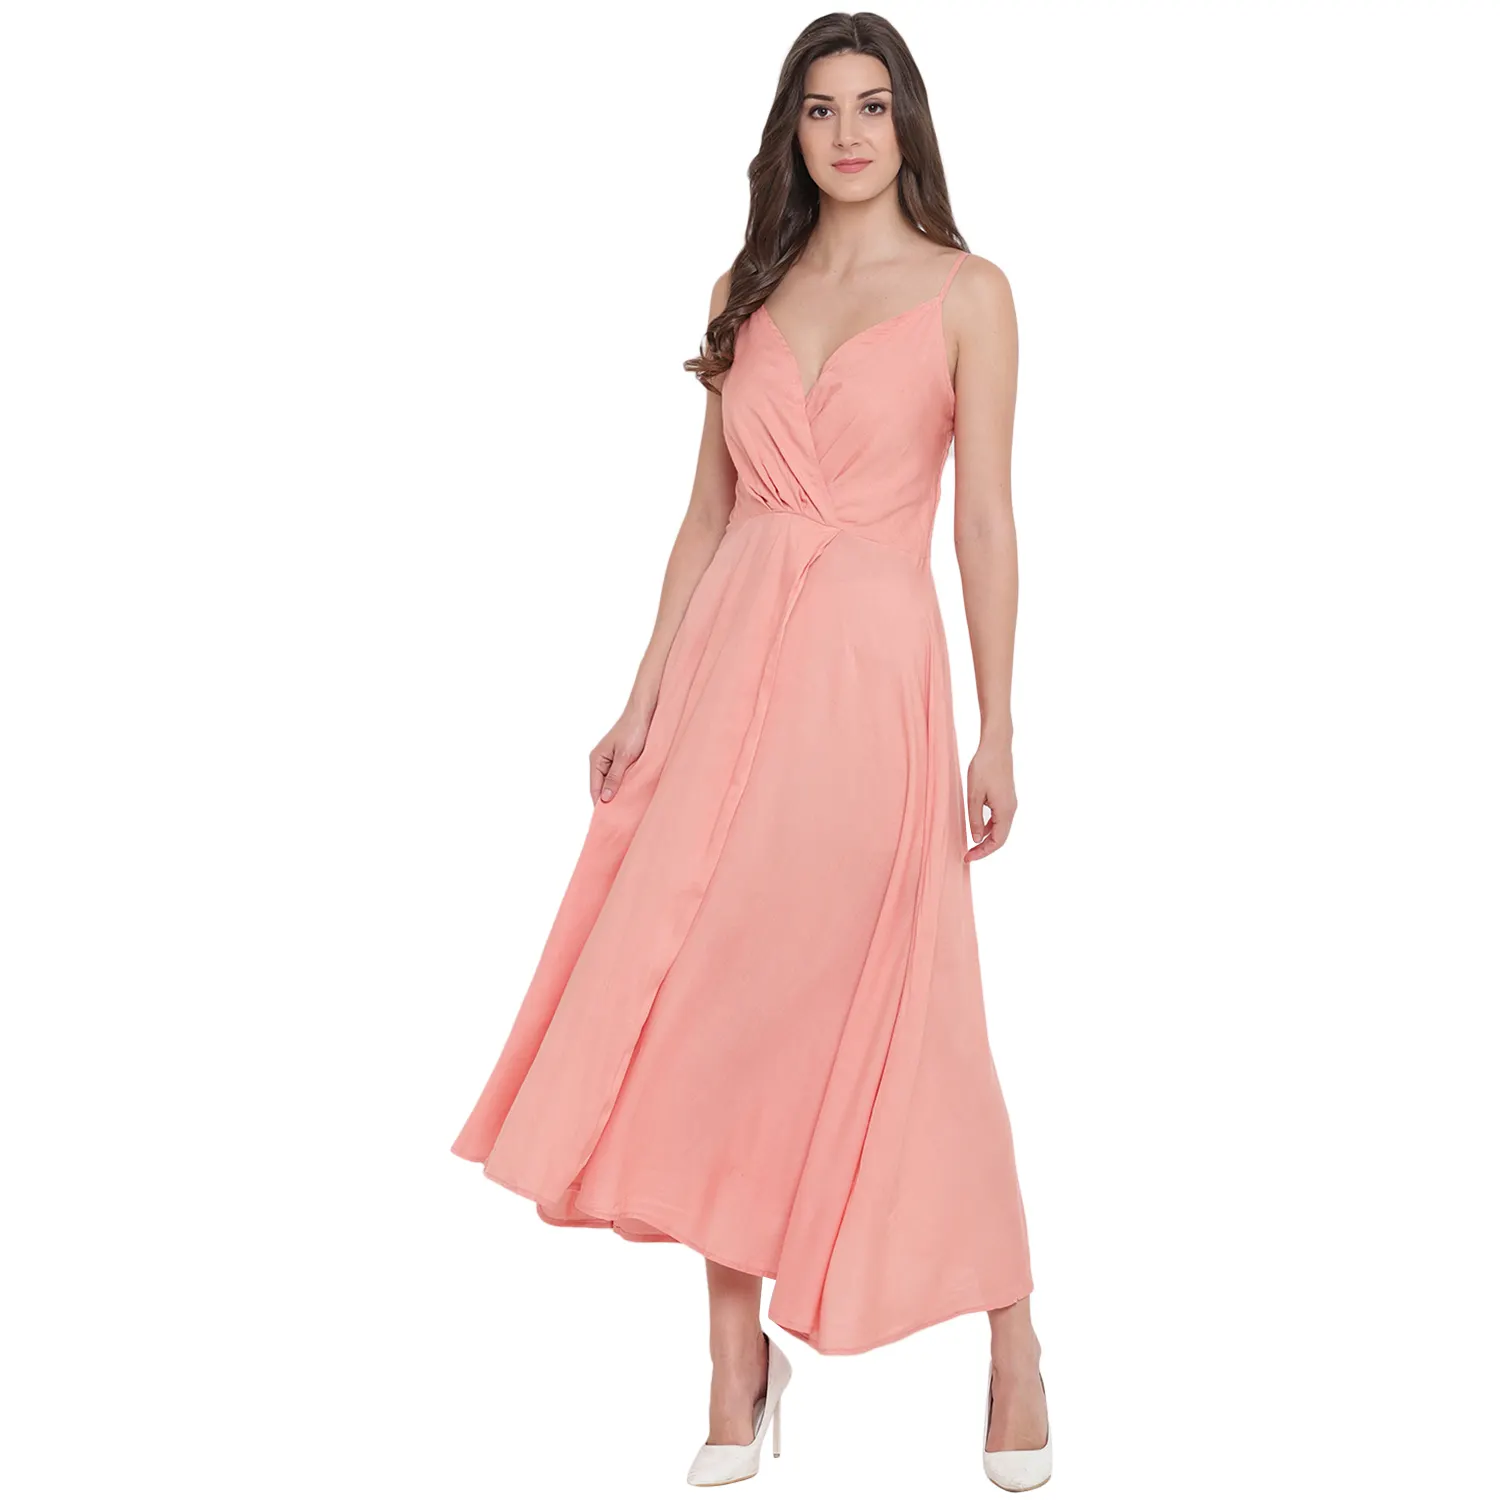 Women's Fit and Flare Solid Rayon Peach Front Open Smoked Gown with Sleeveless Shoulder Straps (AM097)